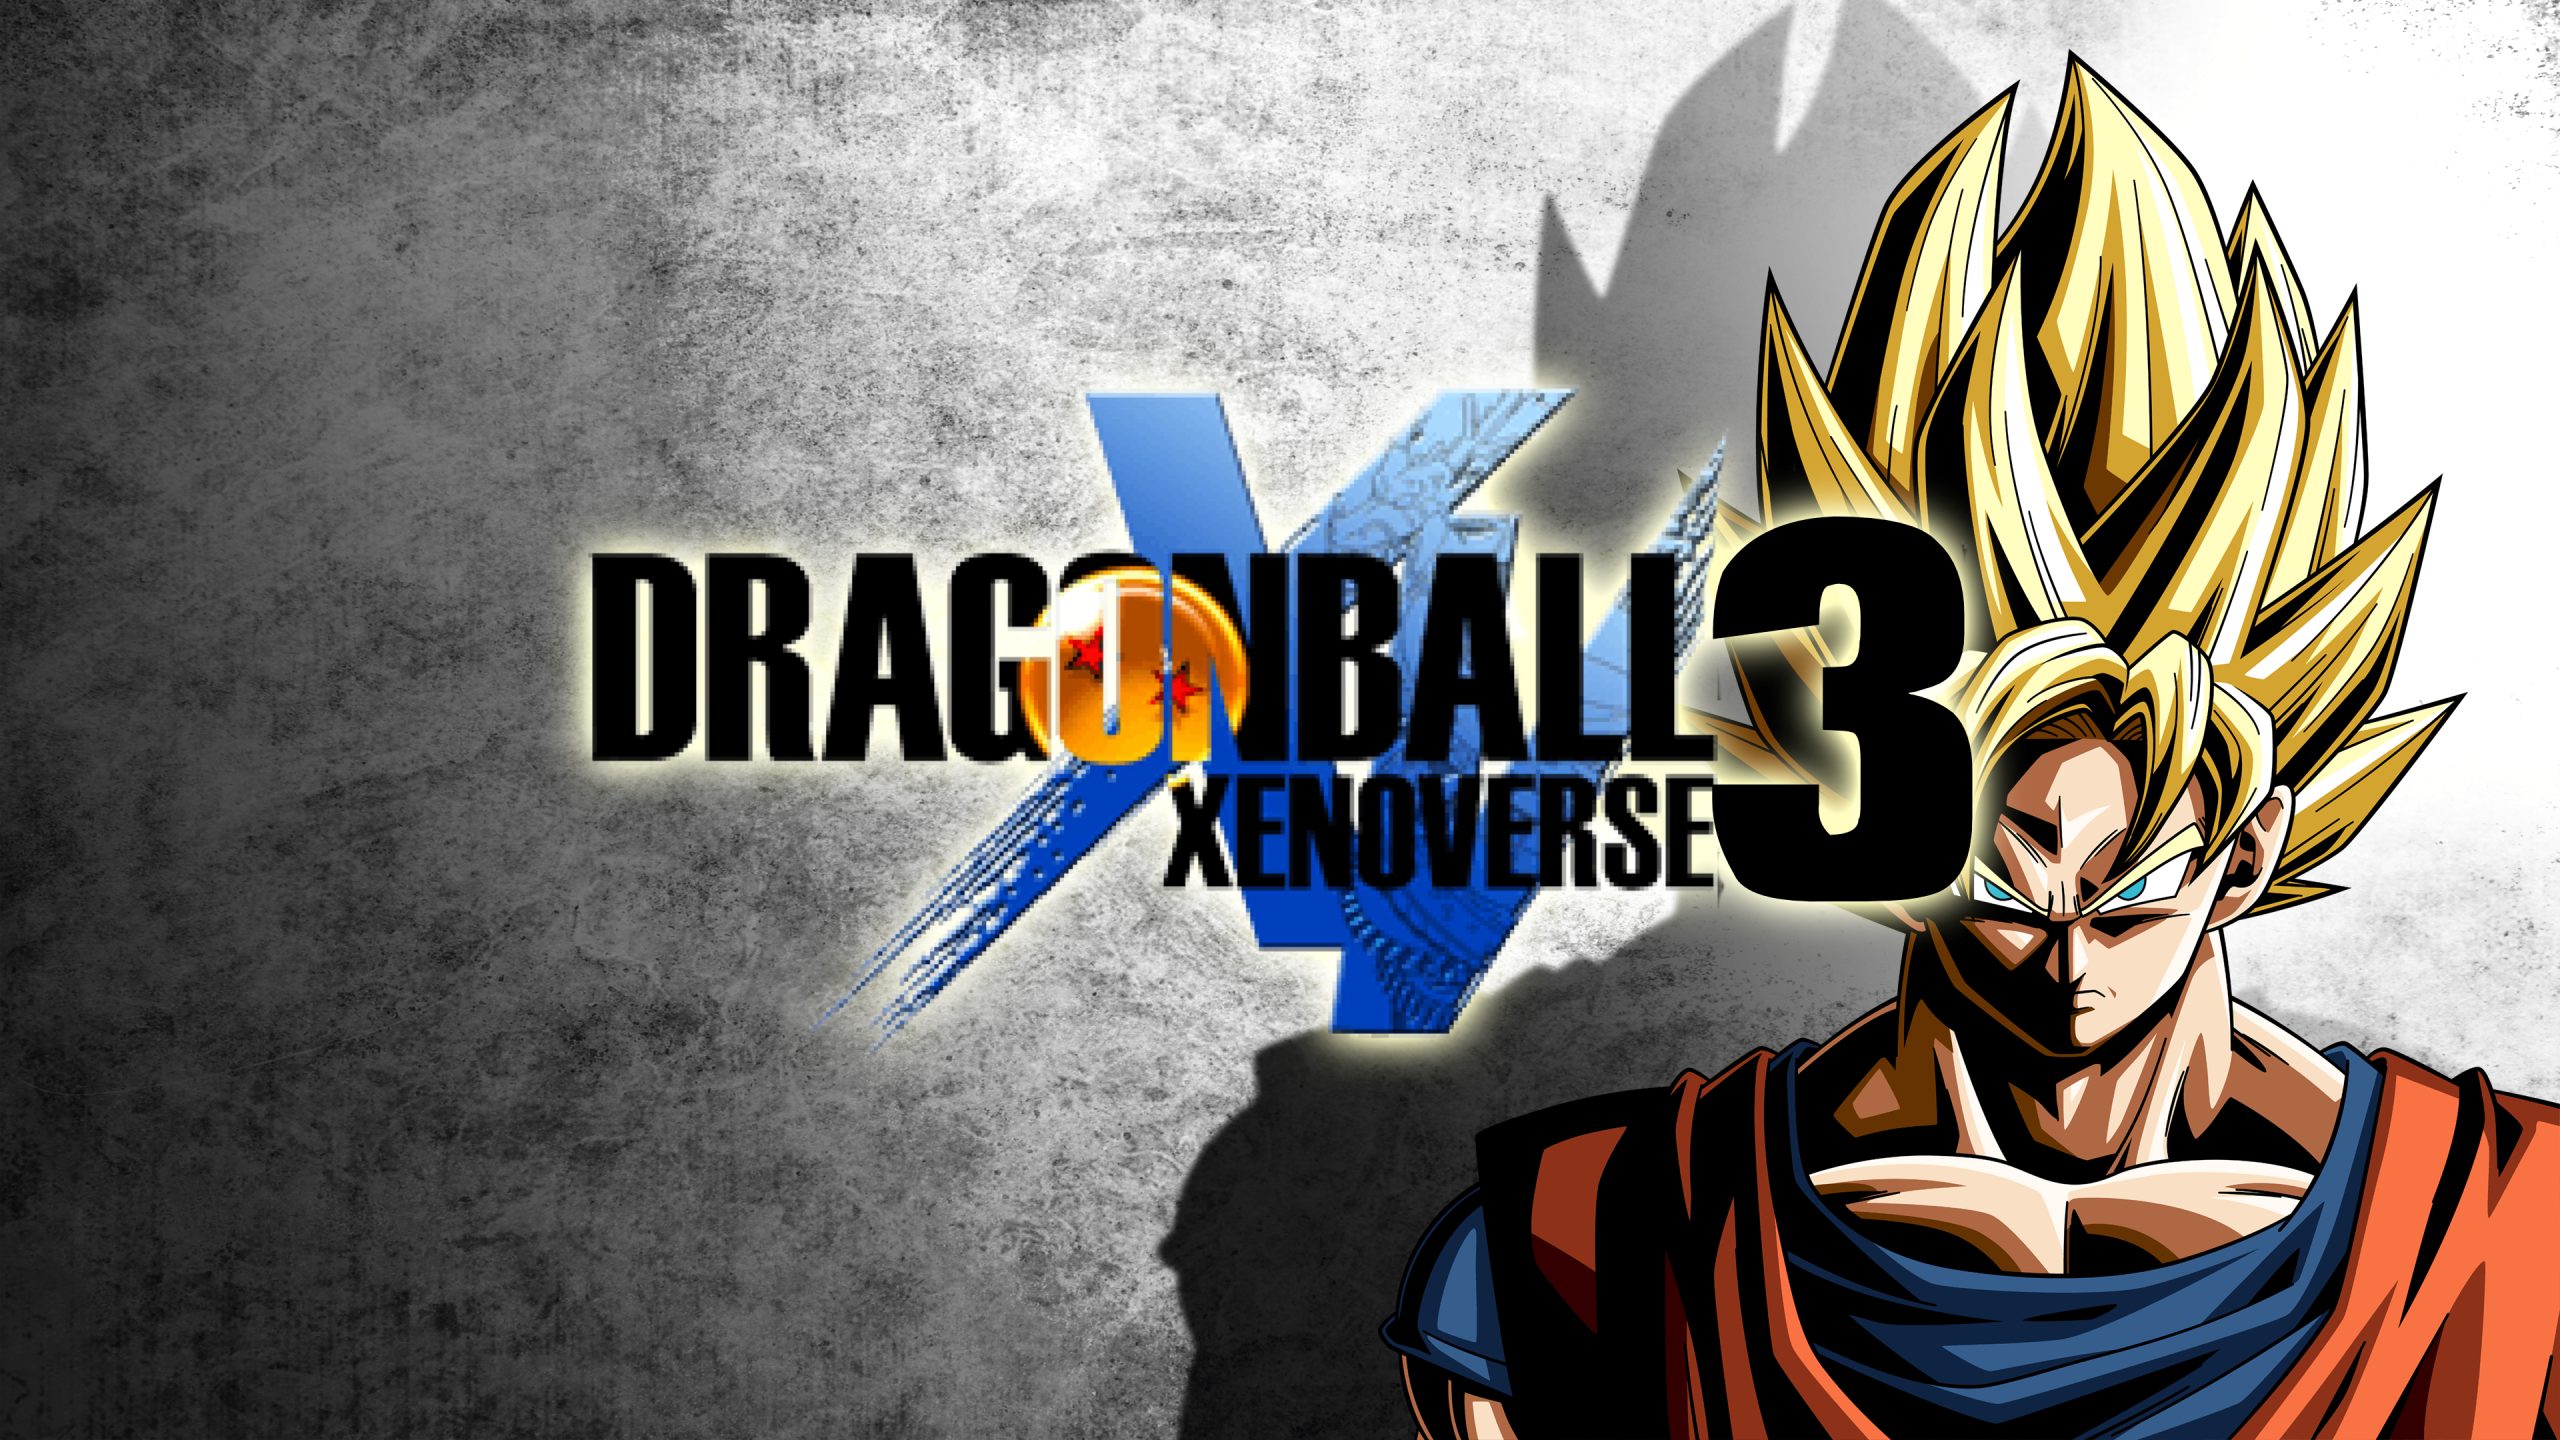 Why do we need a Xenoverse 3? Why not a new game that has the